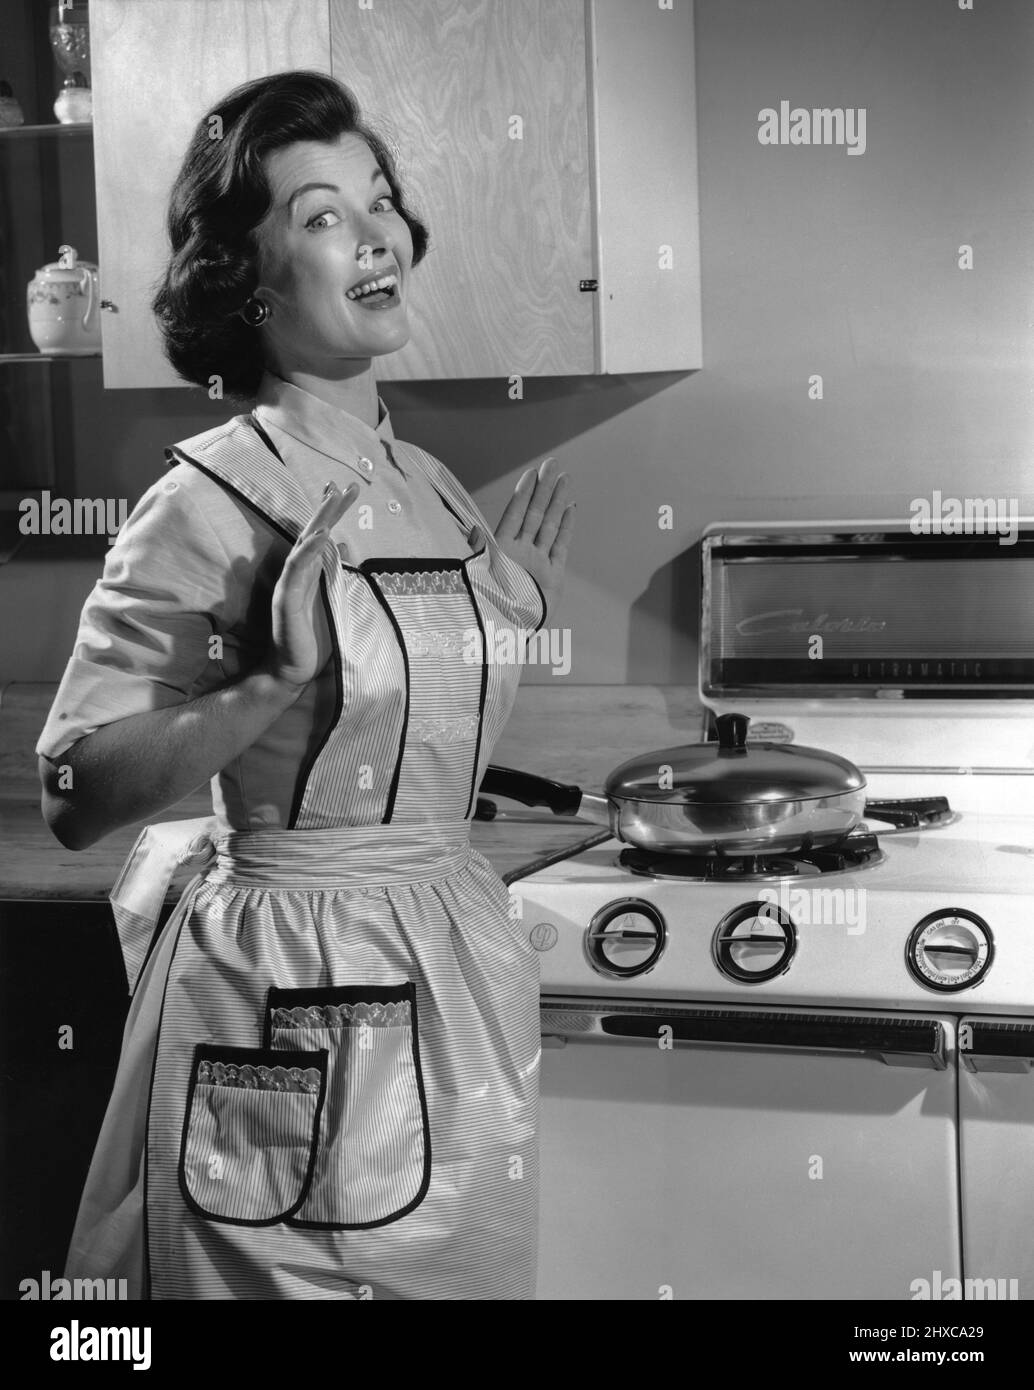 Woman in her mid-30's, well dressed with cooking apron on standing in front of her oven with hands up and thumbs under her apron straps smiling Stock Photo